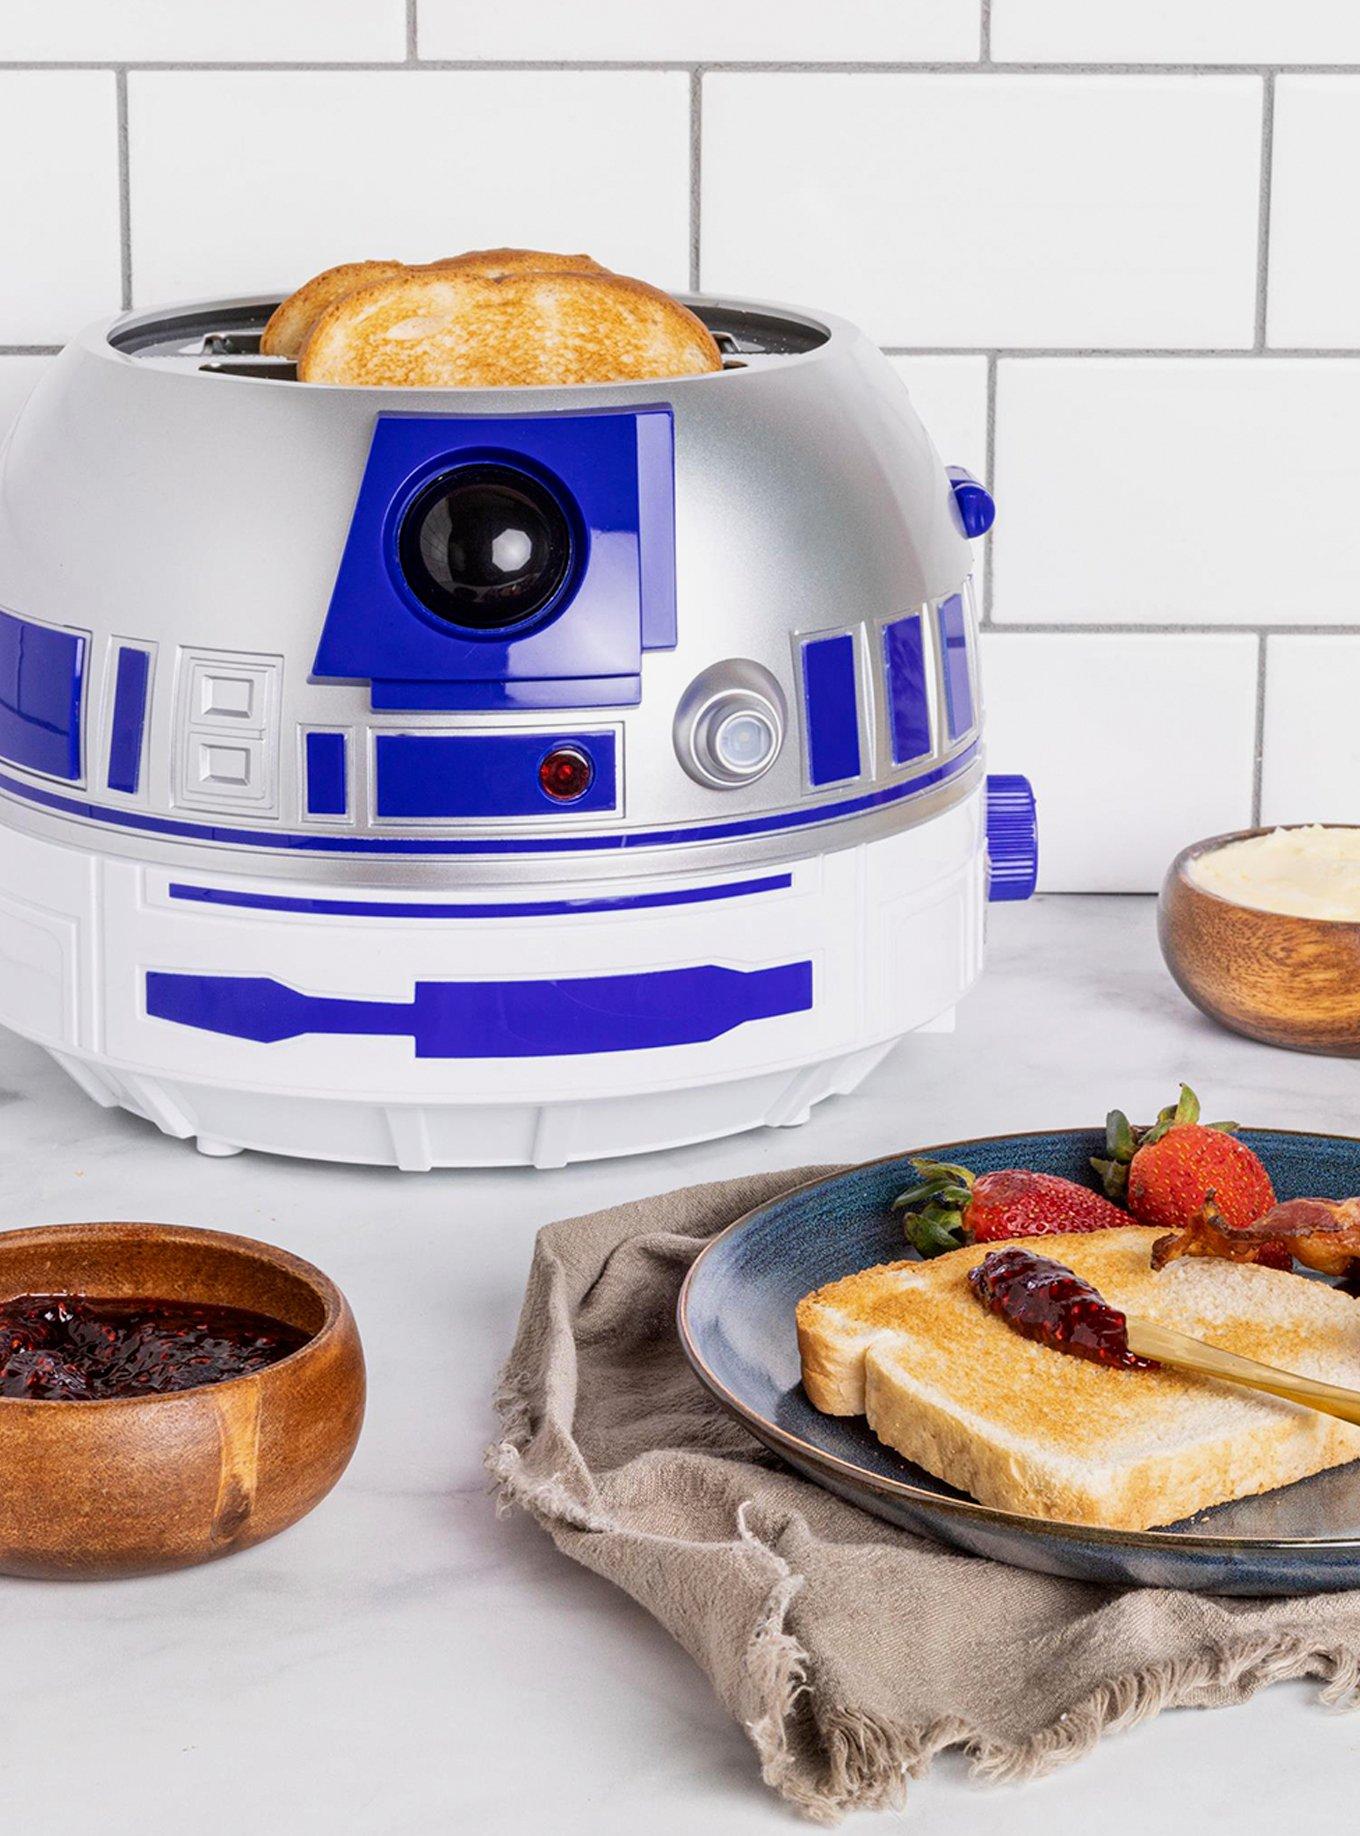 Star Wars R2D2 Halo Toaster